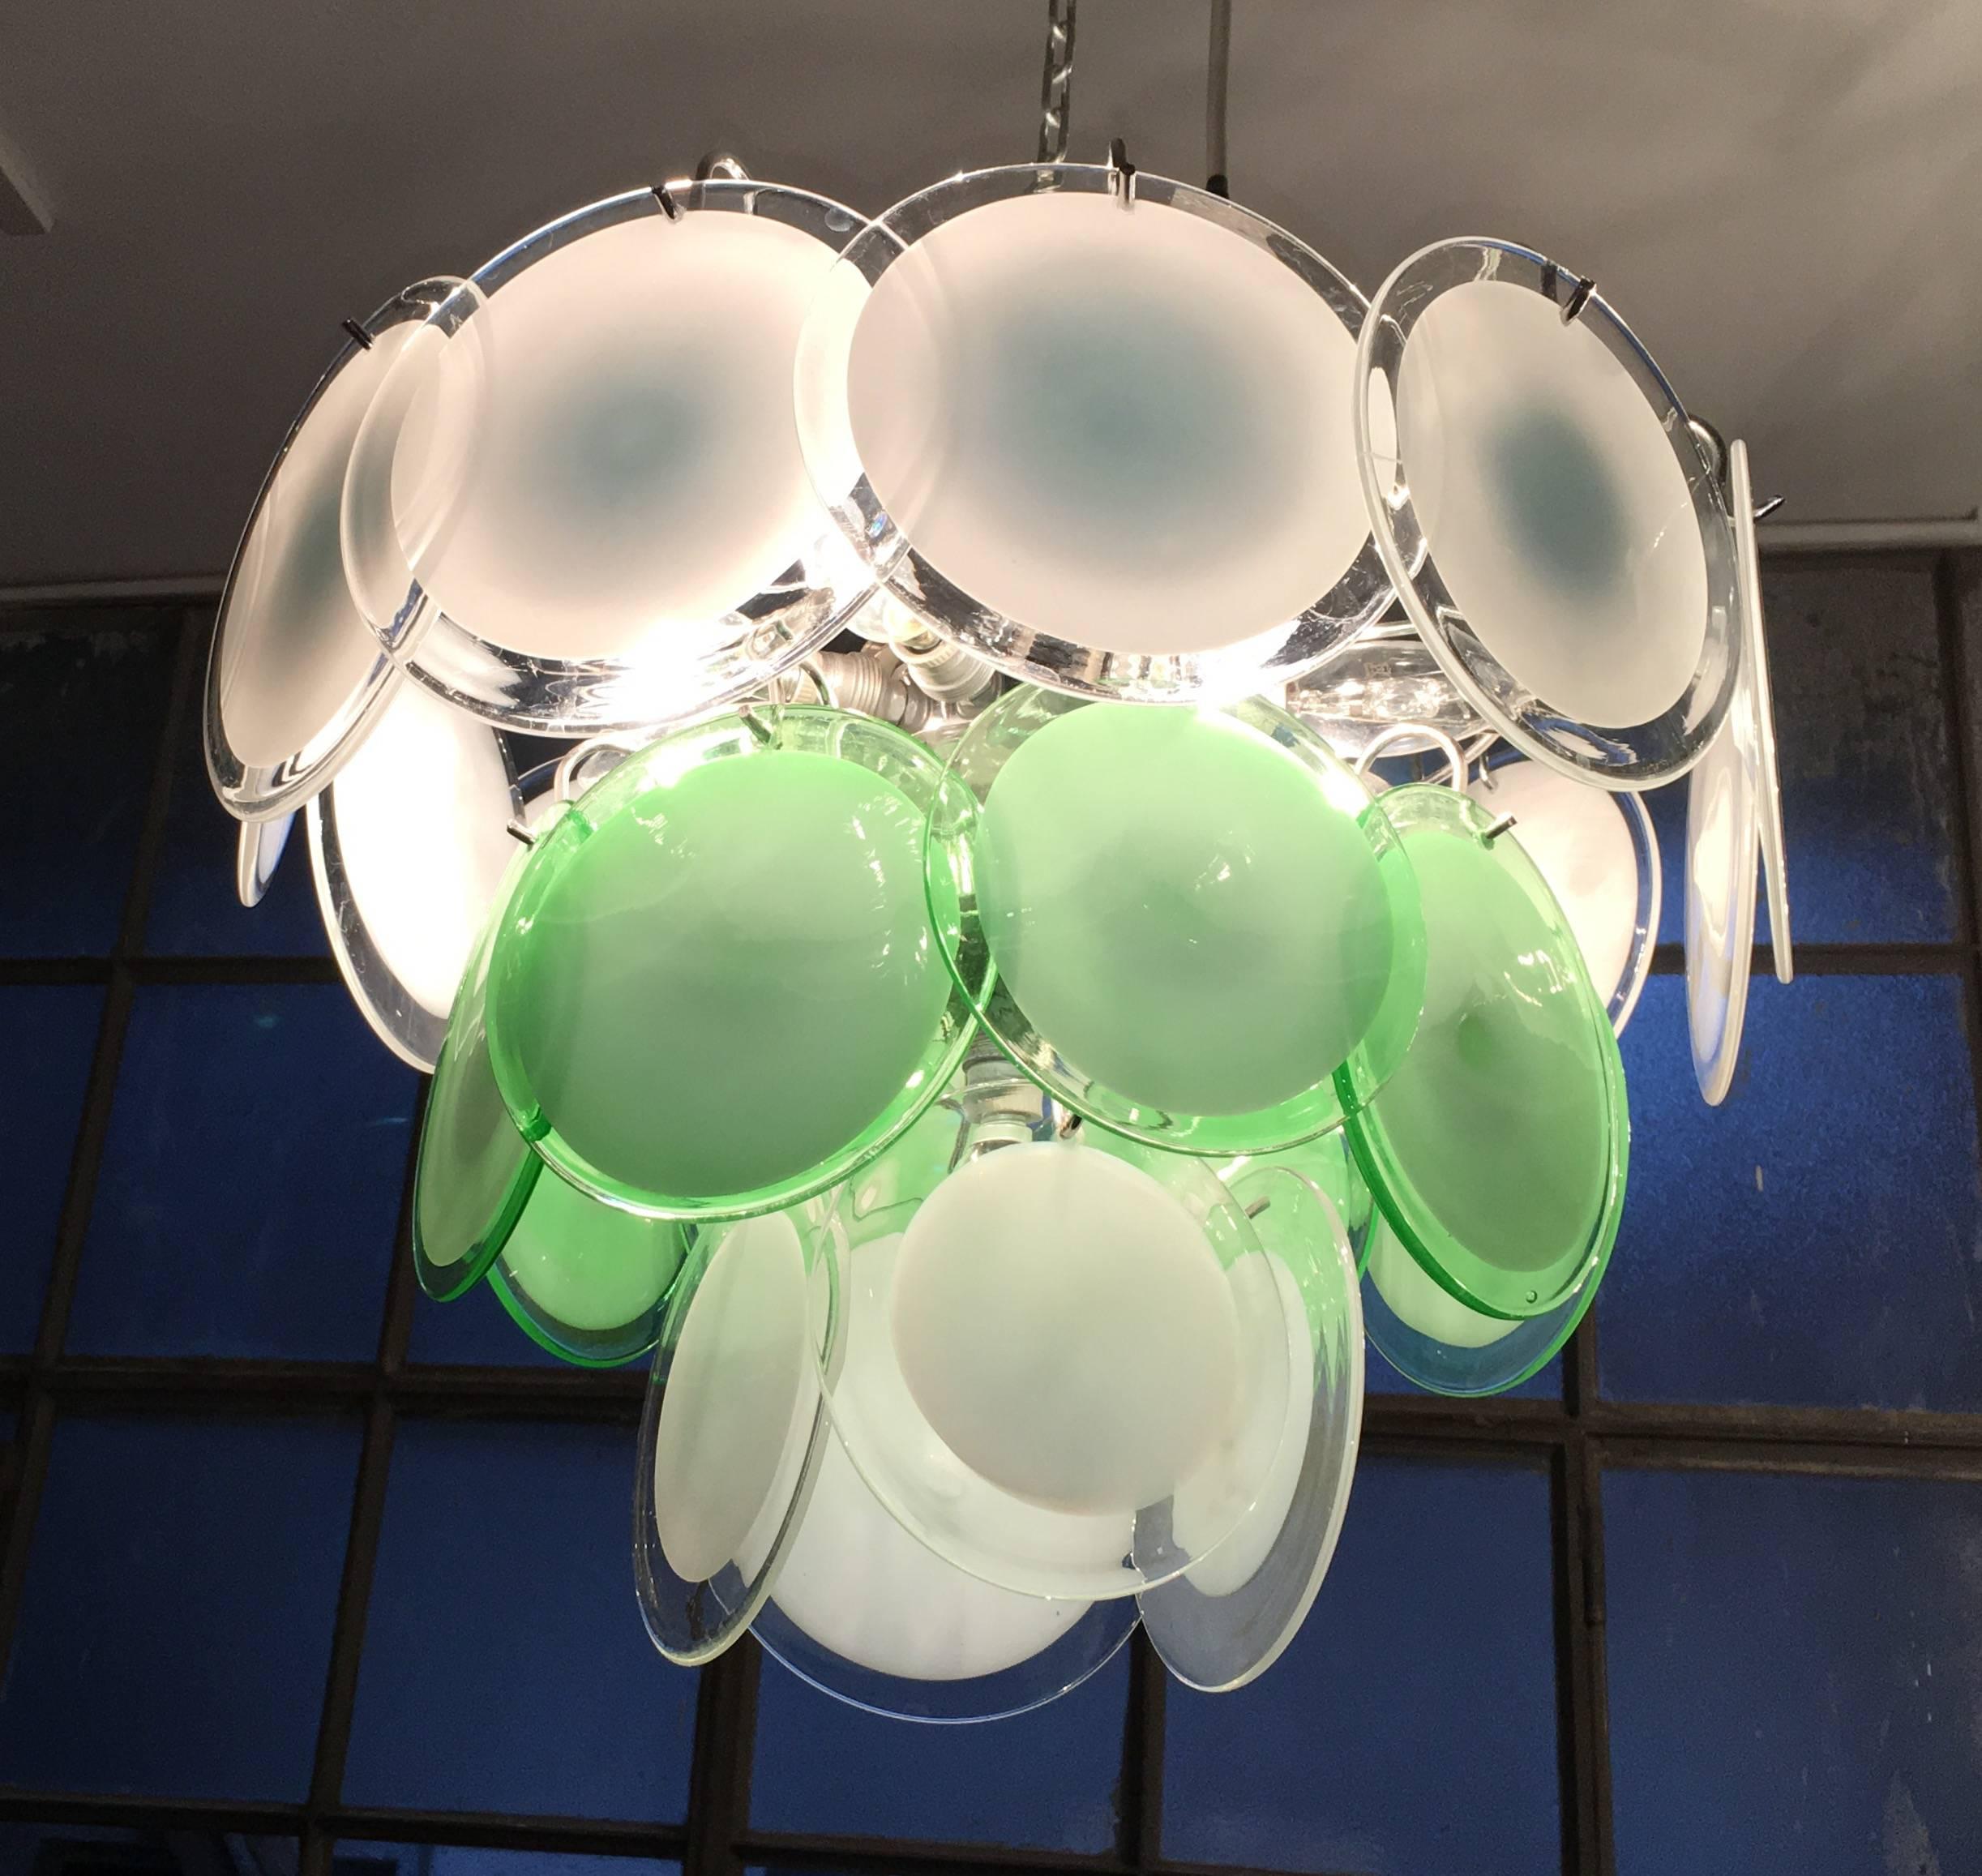 24 white and green discs of precious Murano glass are arranged on three levels.
 